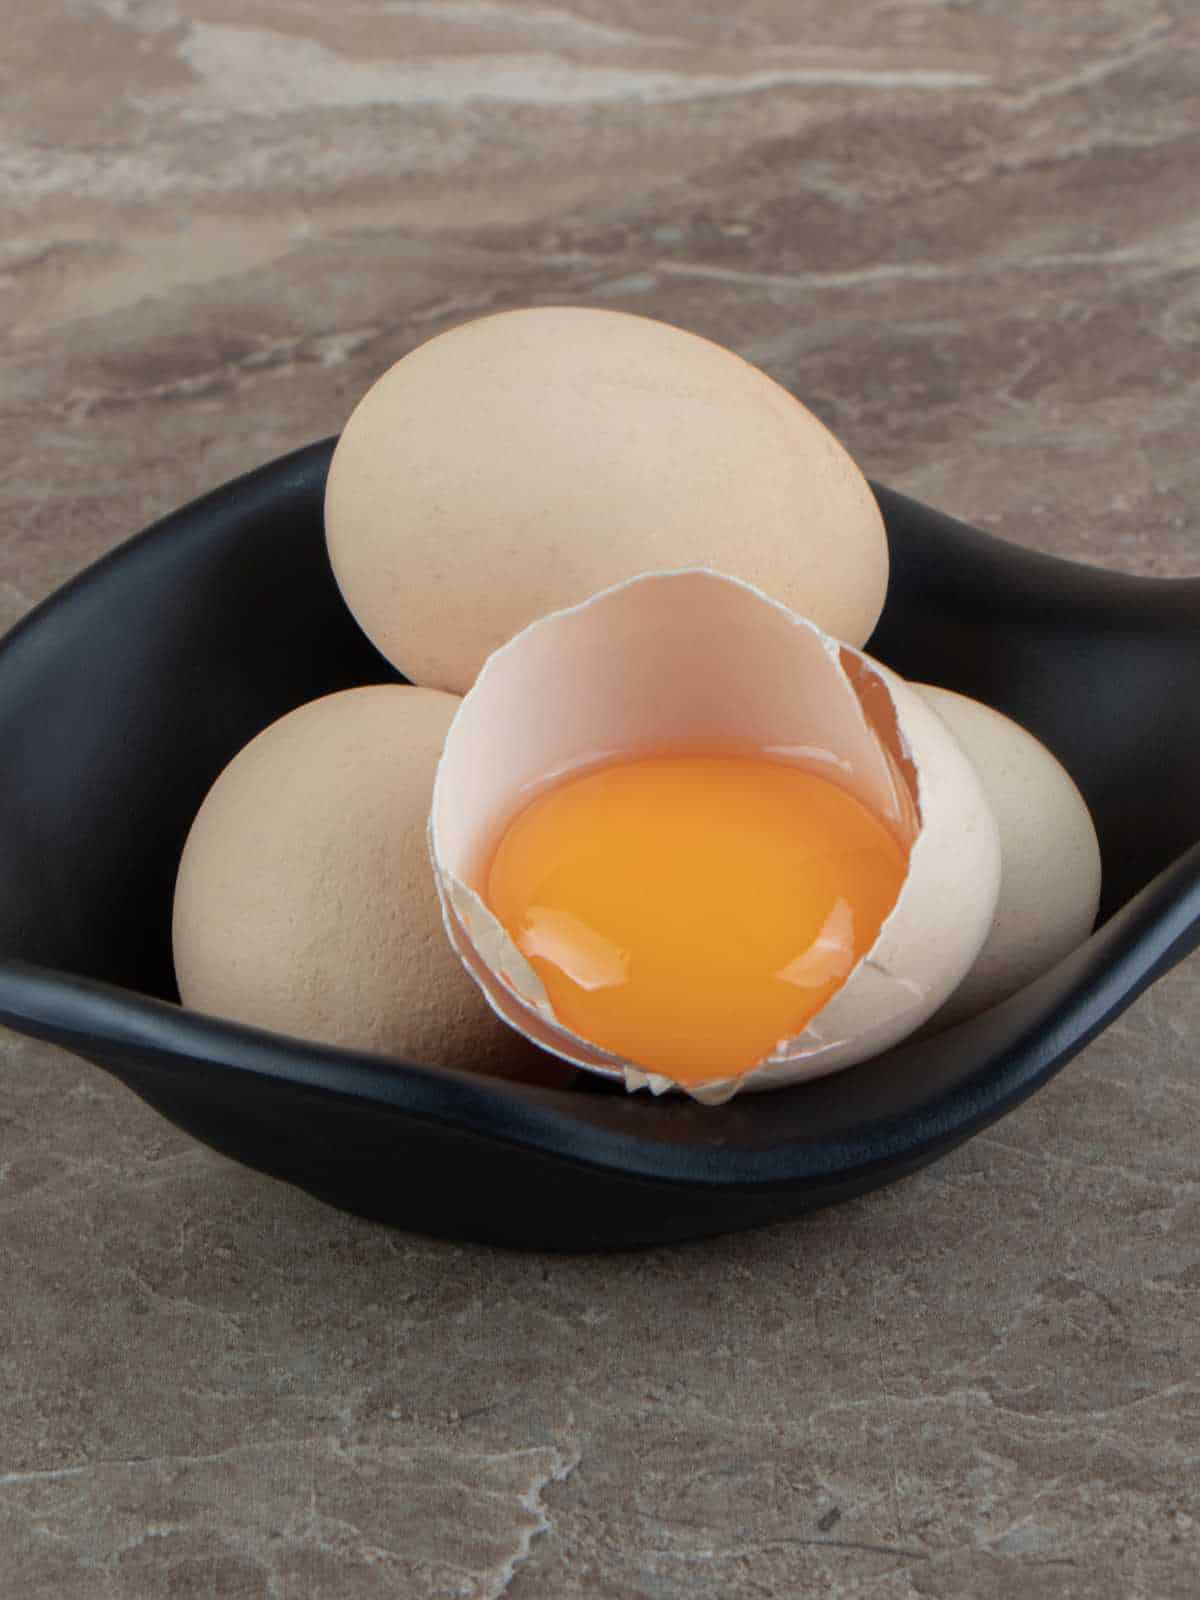 is it safe to eat a cracked egg